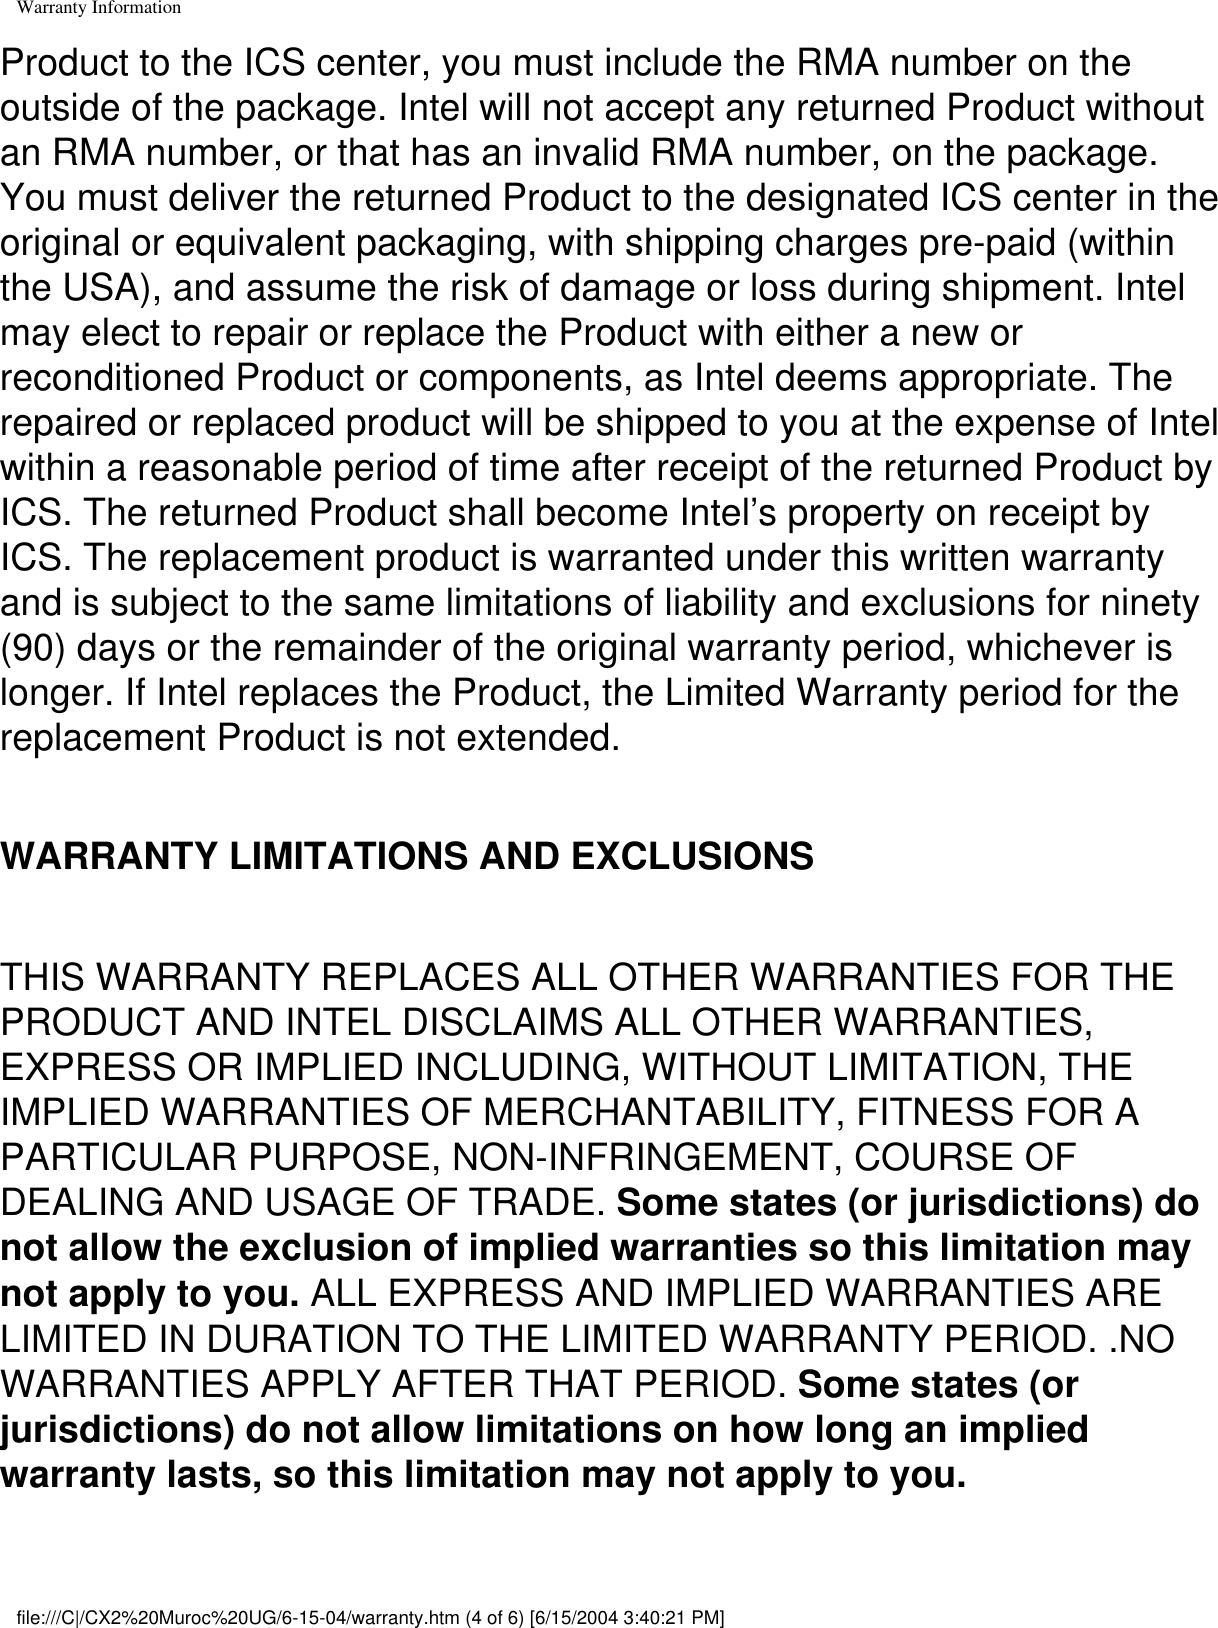 Warranty InformationProduct to the ICS center, you must include the RMA number on the outside of the package. Intel will not accept any returned Product without an RMA number, or that has an invalid RMA number, on the package. You must deliver the returned Product to the designated ICS center in the original or equivalent packaging, with shipping charges pre-paid (within the USA), and assume the risk of damage or loss during shipment. Intel may elect to repair or replace the Product with either a new or reconditioned Product or components, as Intel deems appropriate. The repaired or replaced product will be shipped to you at the expense of Intel within a reasonable period of time after receipt of the returned Product by ICS. The returned Product shall become Intel’s property on receipt by ICS. The replacement product is warranted under this written warranty and is subject to the same limitations of liability and exclusions for ninety (90) days or the remainder of the original warranty period, whichever is longer. If Intel replaces the Product, the Limited Warranty period for the replacement Product is not extended.WARRANTY LIMITATIONS AND EXCLUSIONSTHIS WARRANTY REPLACES ALL OTHER WARRANTIES FOR THE PRODUCT AND INTEL DISCLAIMS ALL OTHER WARRANTIES, EXPRESS OR IMPLIED INCLUDING, WITHOUT LIMITATION, THE IMPLIED WARRANTIES OF MERCHANTABILITY, FITNESS FOR A PARTICULAR PURPOSE, NON-INFRINGEMENT, COURSE OF DEALING AND USAGE OF TRADE. Some states (or jurisdictions) do not allow the exclusion of implied warranties so this limitation may not apply to you. ALL EXPRESS AND IMPLIED WARRANTIES ARE LIMITED IN DURATION TO THE LIMITED WARRANTY PERIOD. .NO WARRANTIES APPLY AFTER THAT PERIOD. Some states (or jurisdictions) do not allow limitations on how long an implied warranty lasts, so this limitation may not apply to you.file:///C|/CX2%20Muroc%20UG/6-15-04/warranty.htm (4 of 6) [6/15/2004 3:40:21 PM]